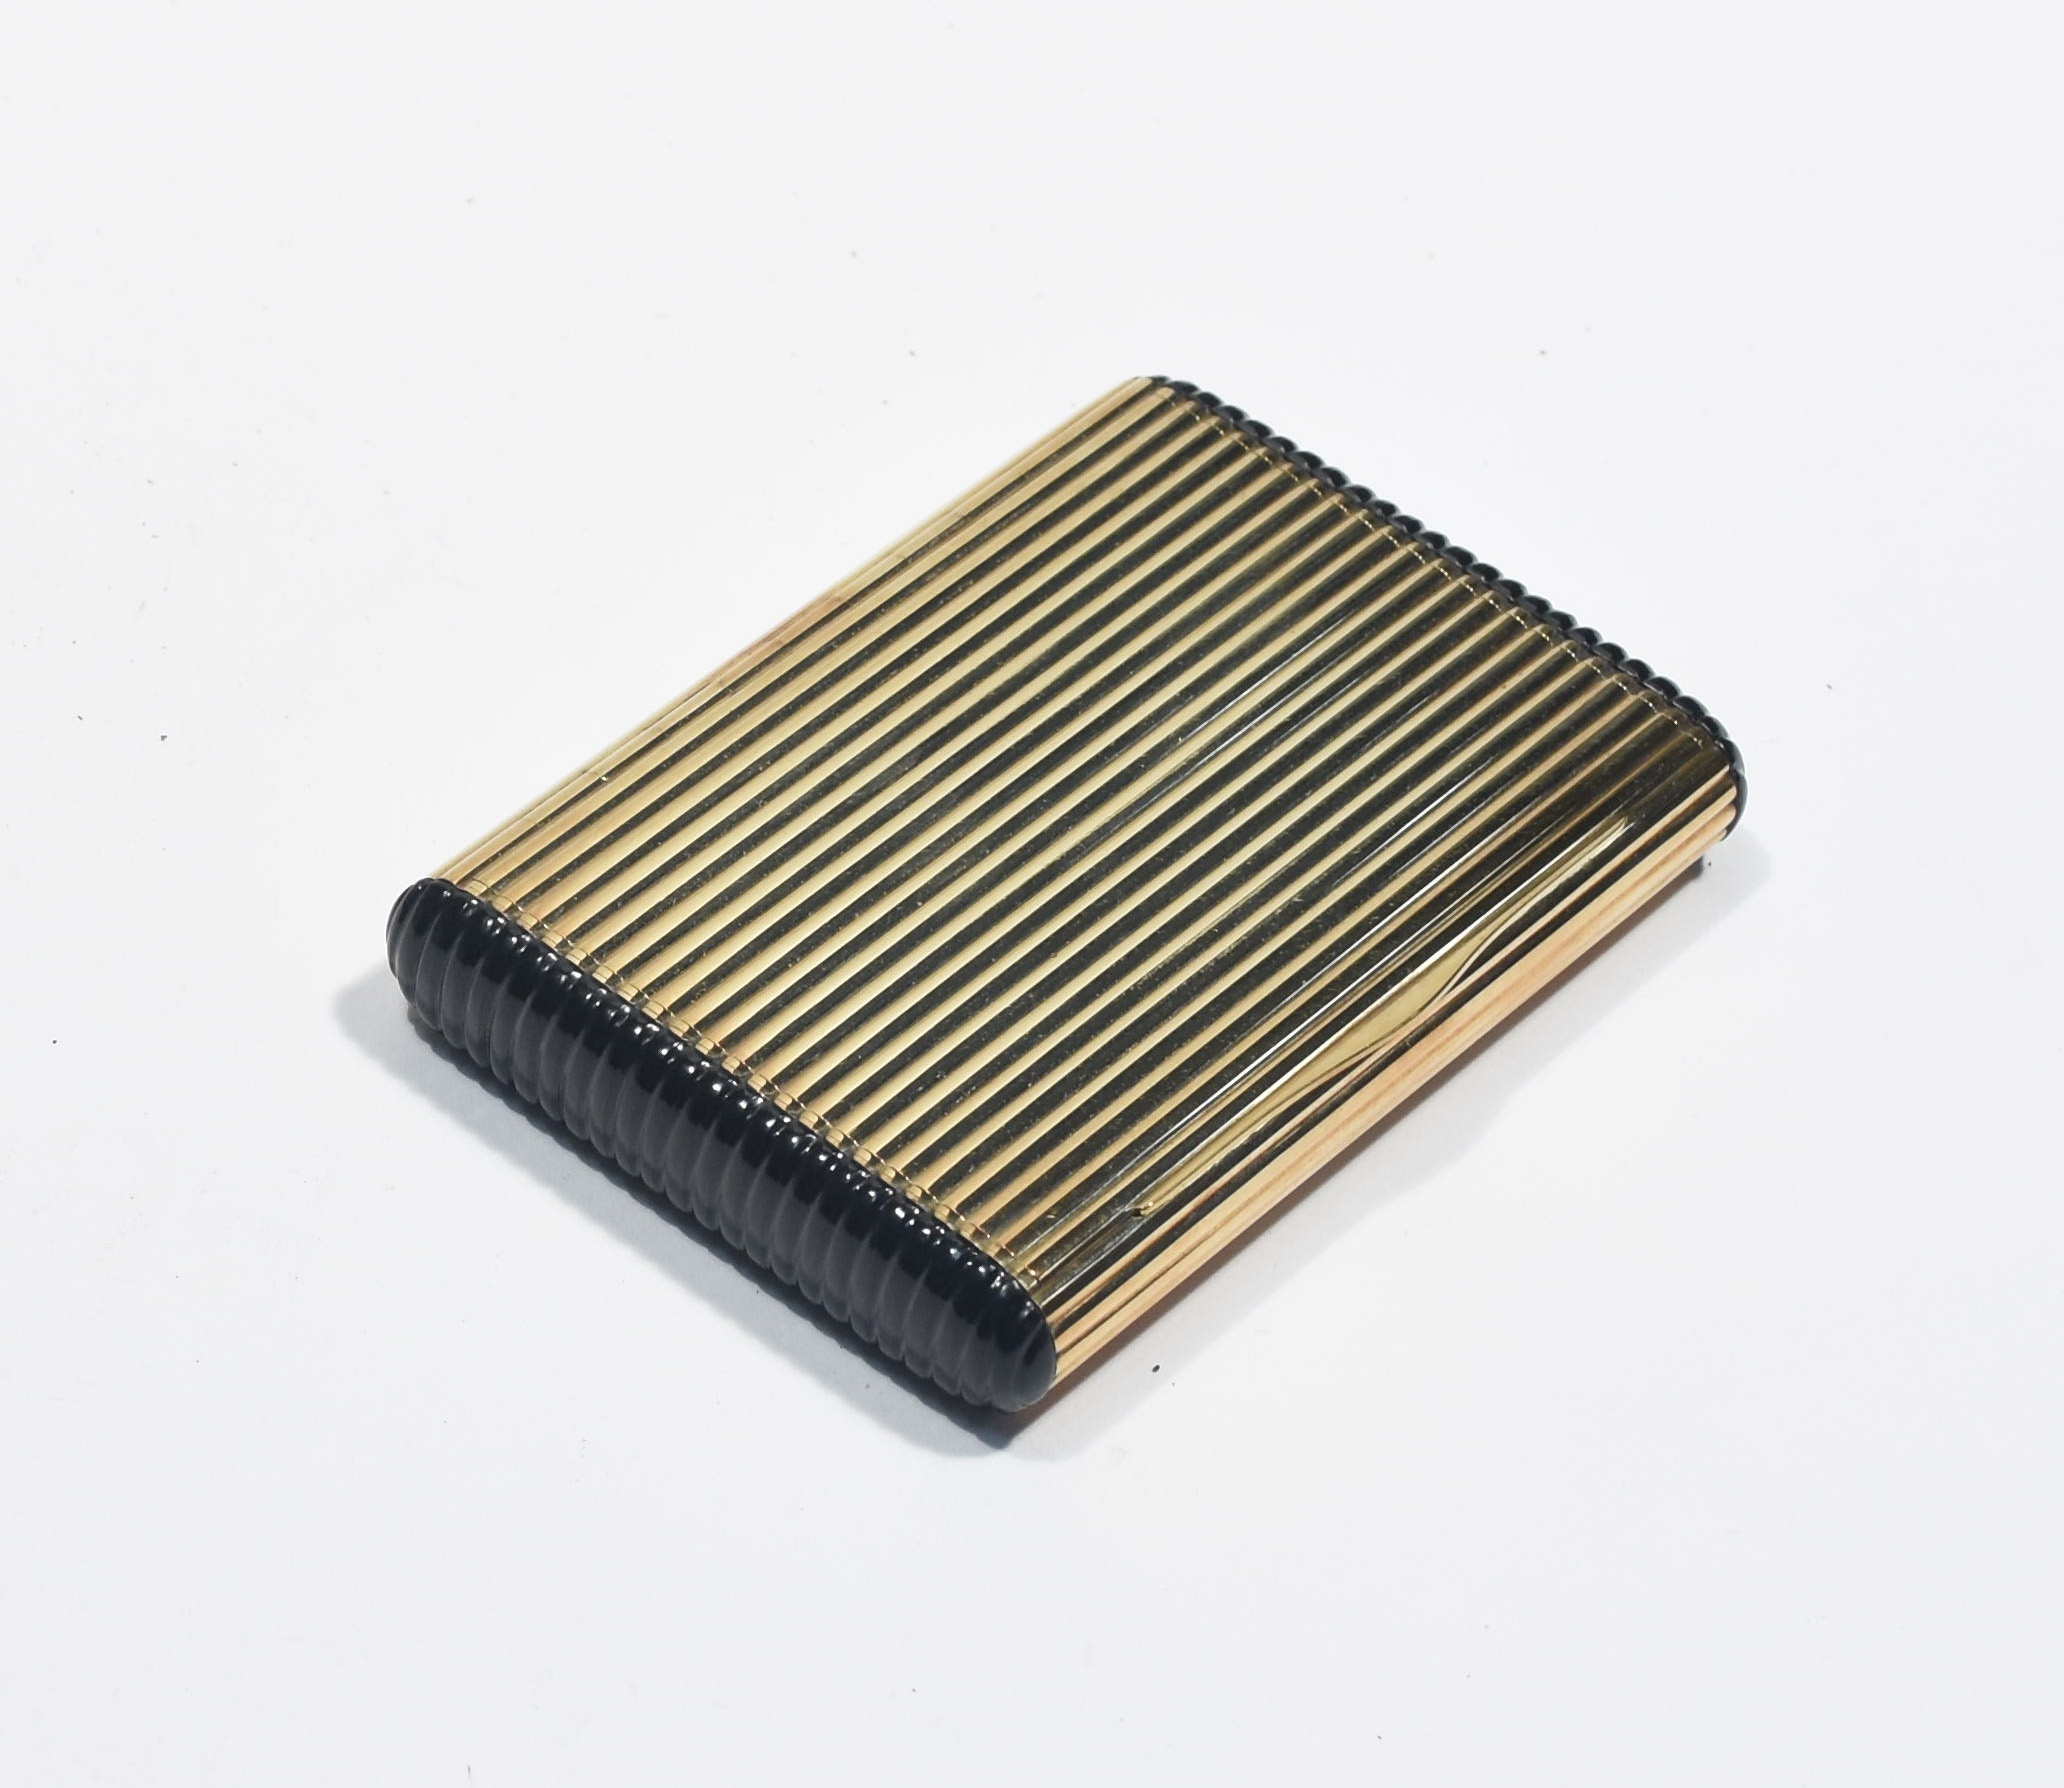 14K yellow gold and black onyx cigarette case